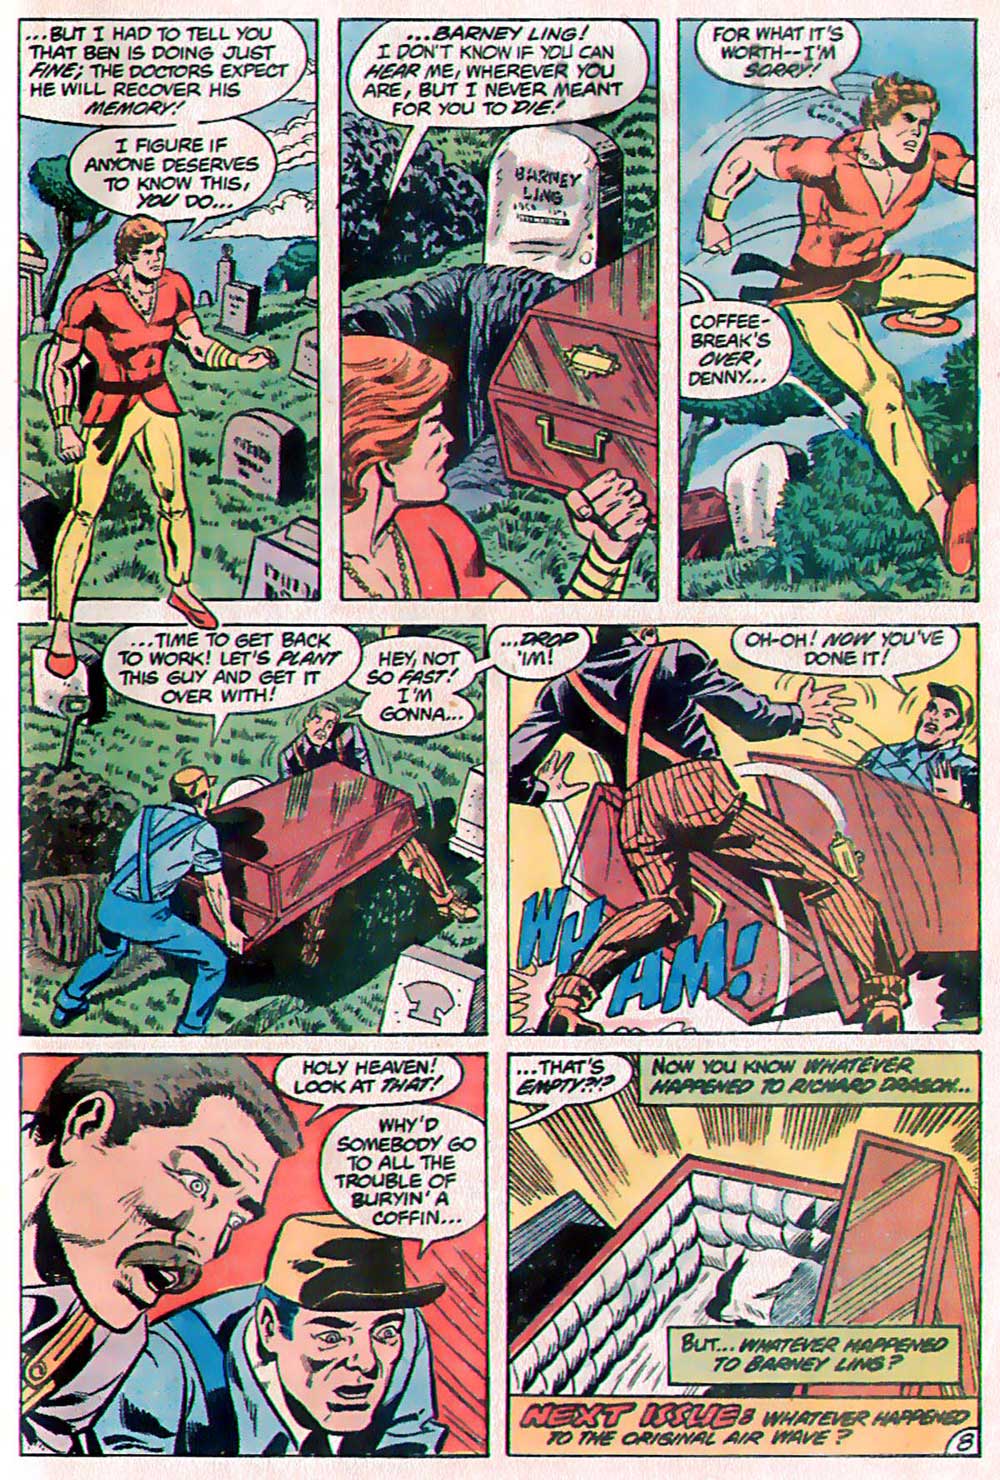 Whatever Happened To... Richard Dragon, Kung Fu Fighter! From DC Comics Presents #39, by Mike W. Barr, Alex Saviuk, and Vince Colletta.